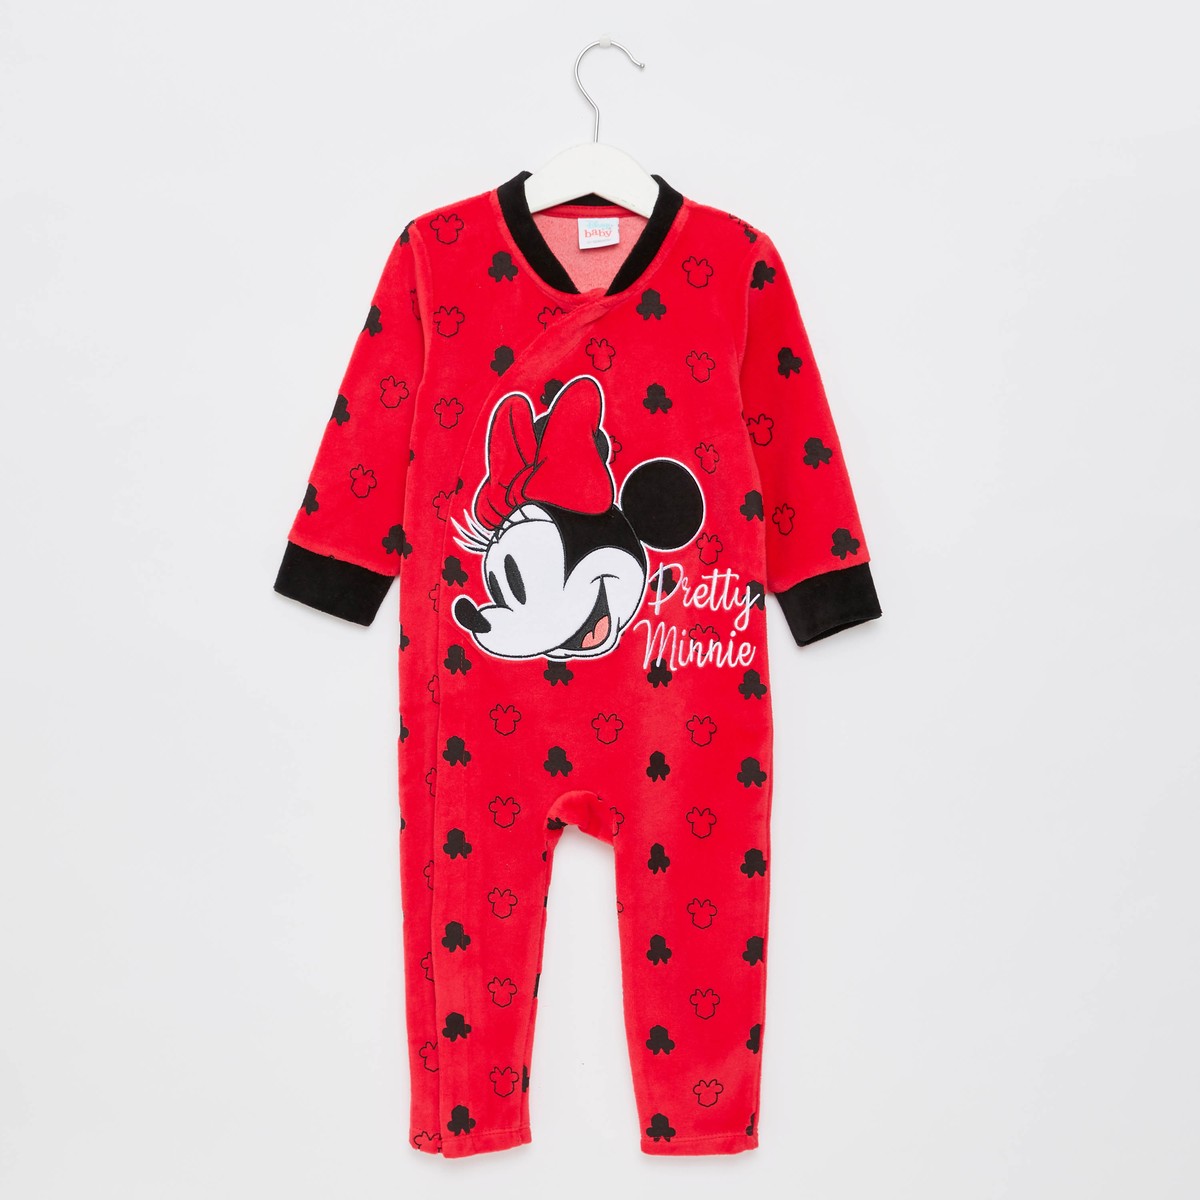 Minnie Mouse Print Full Length Sleepsuit with Round Neck